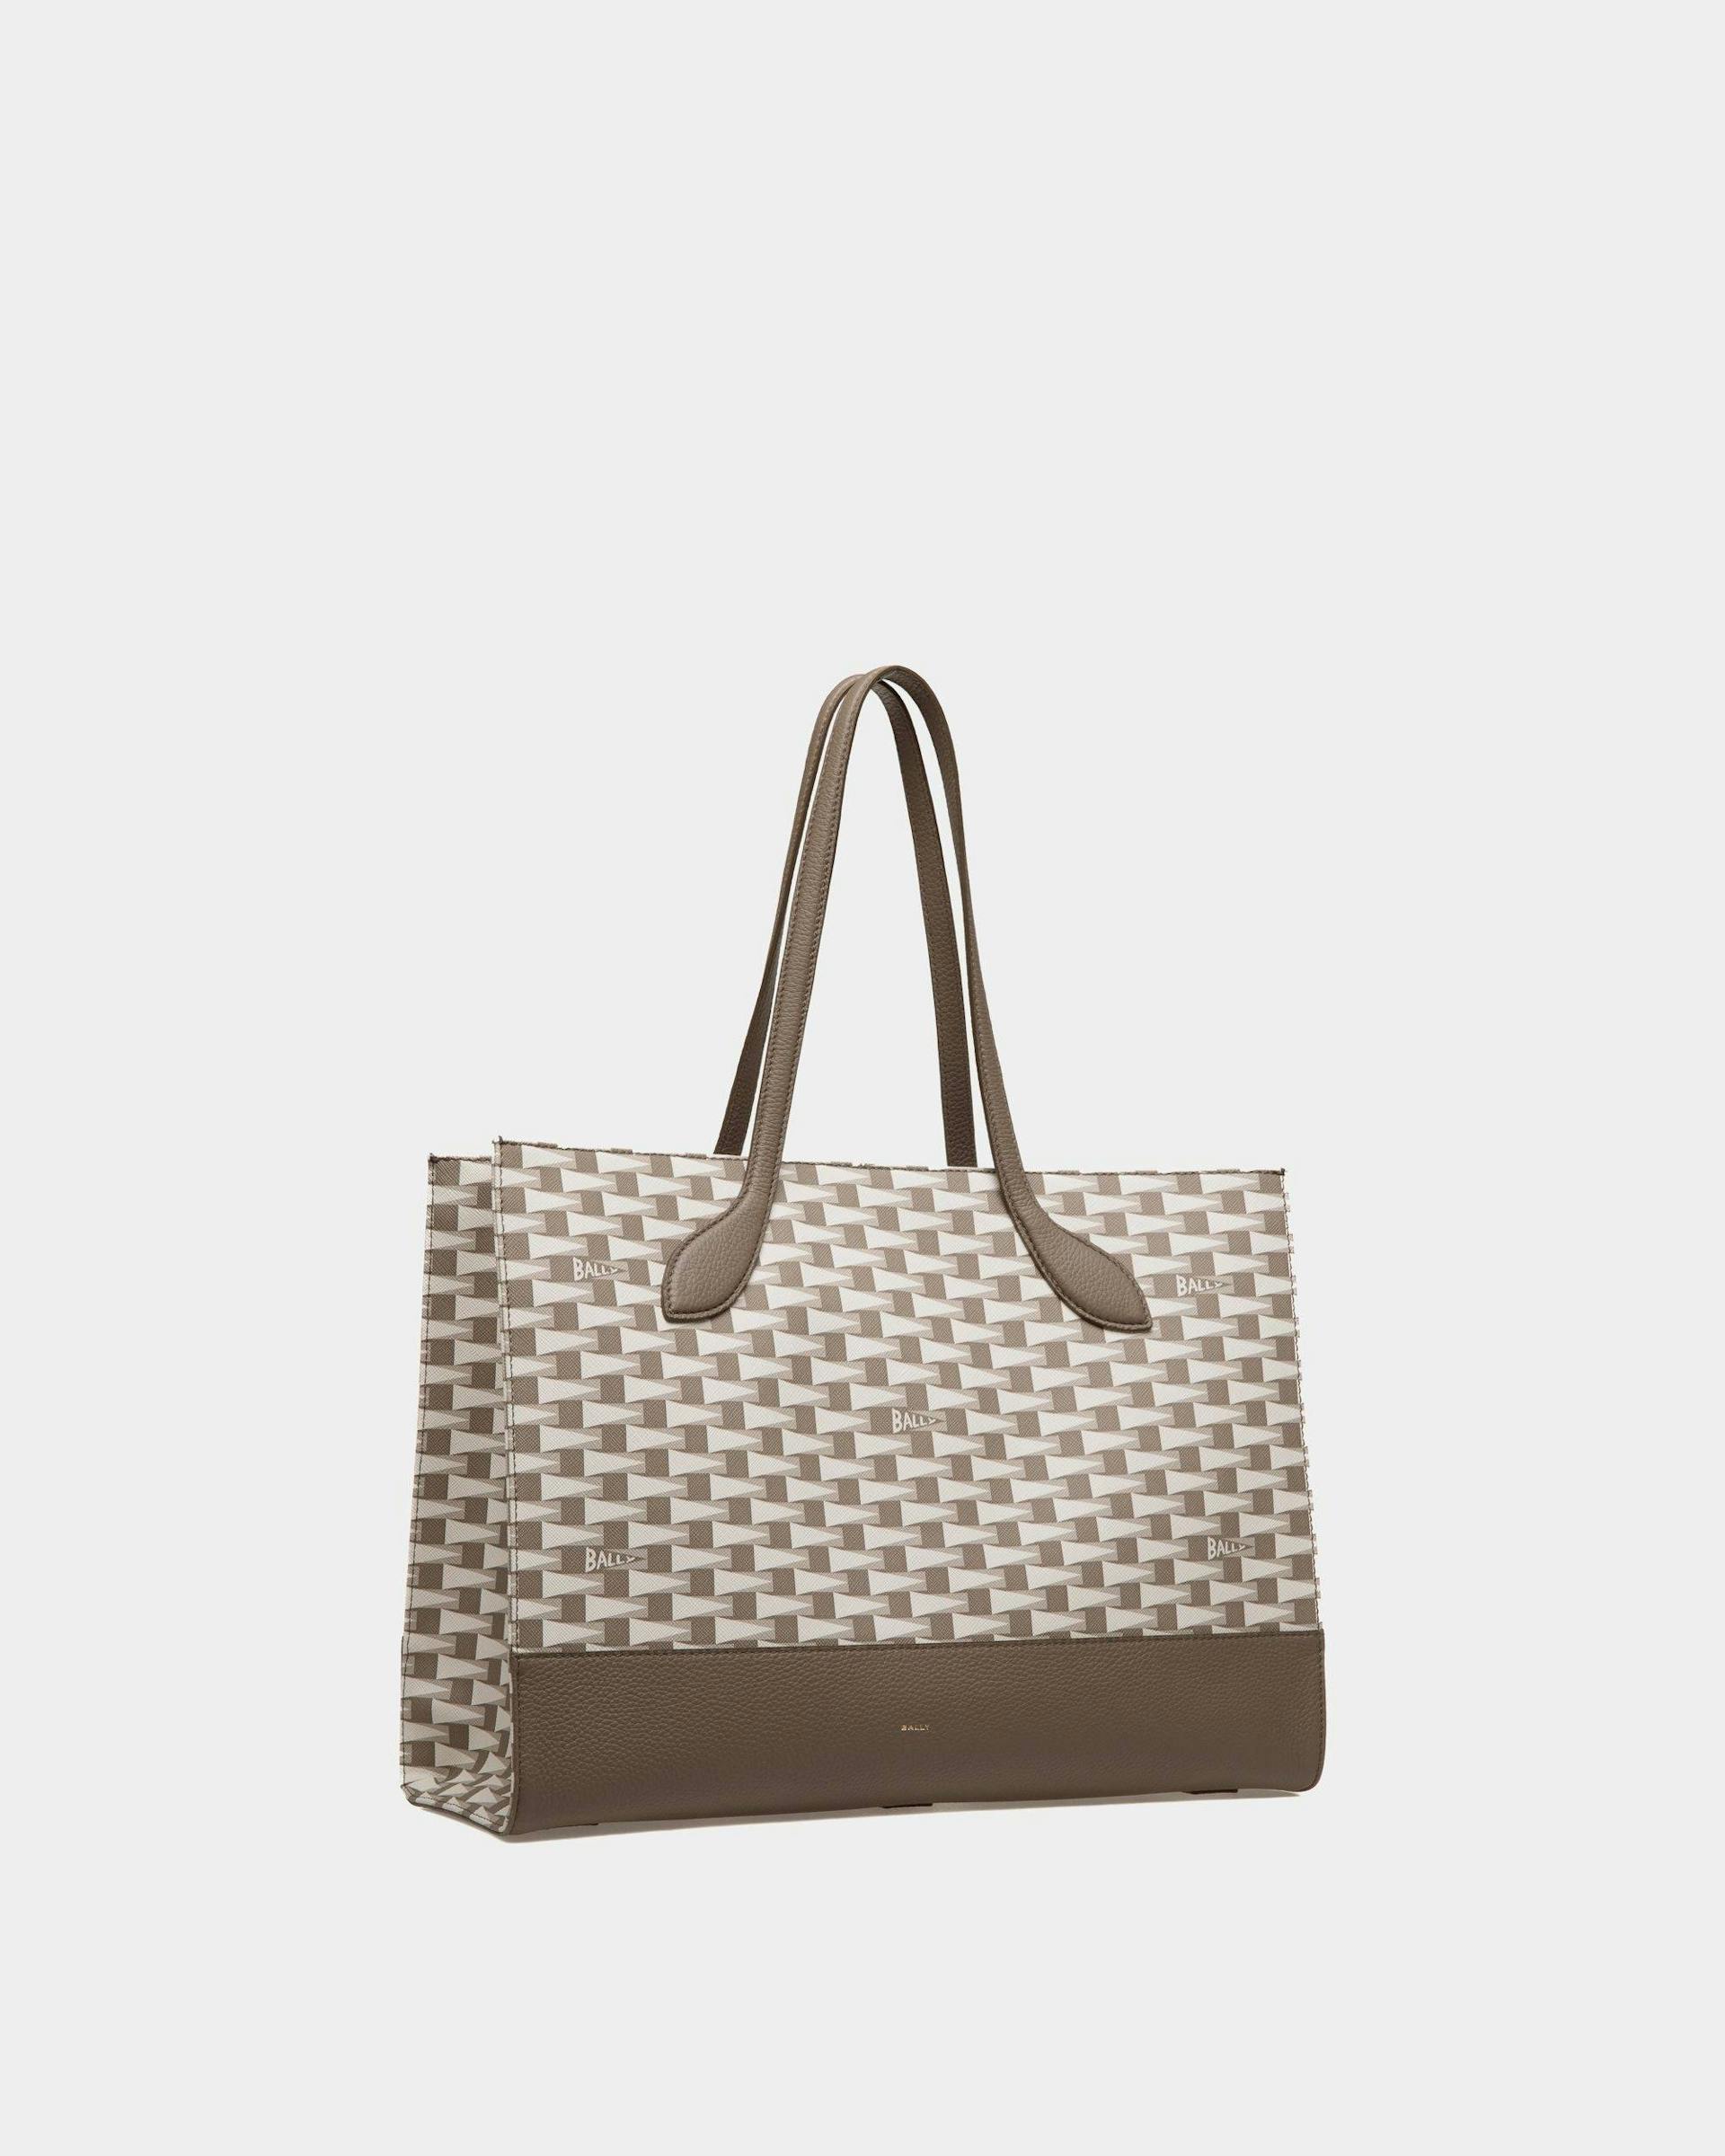 Women's Pennant Tote Bag in TPU | Bally | Still Life 3/4 Front